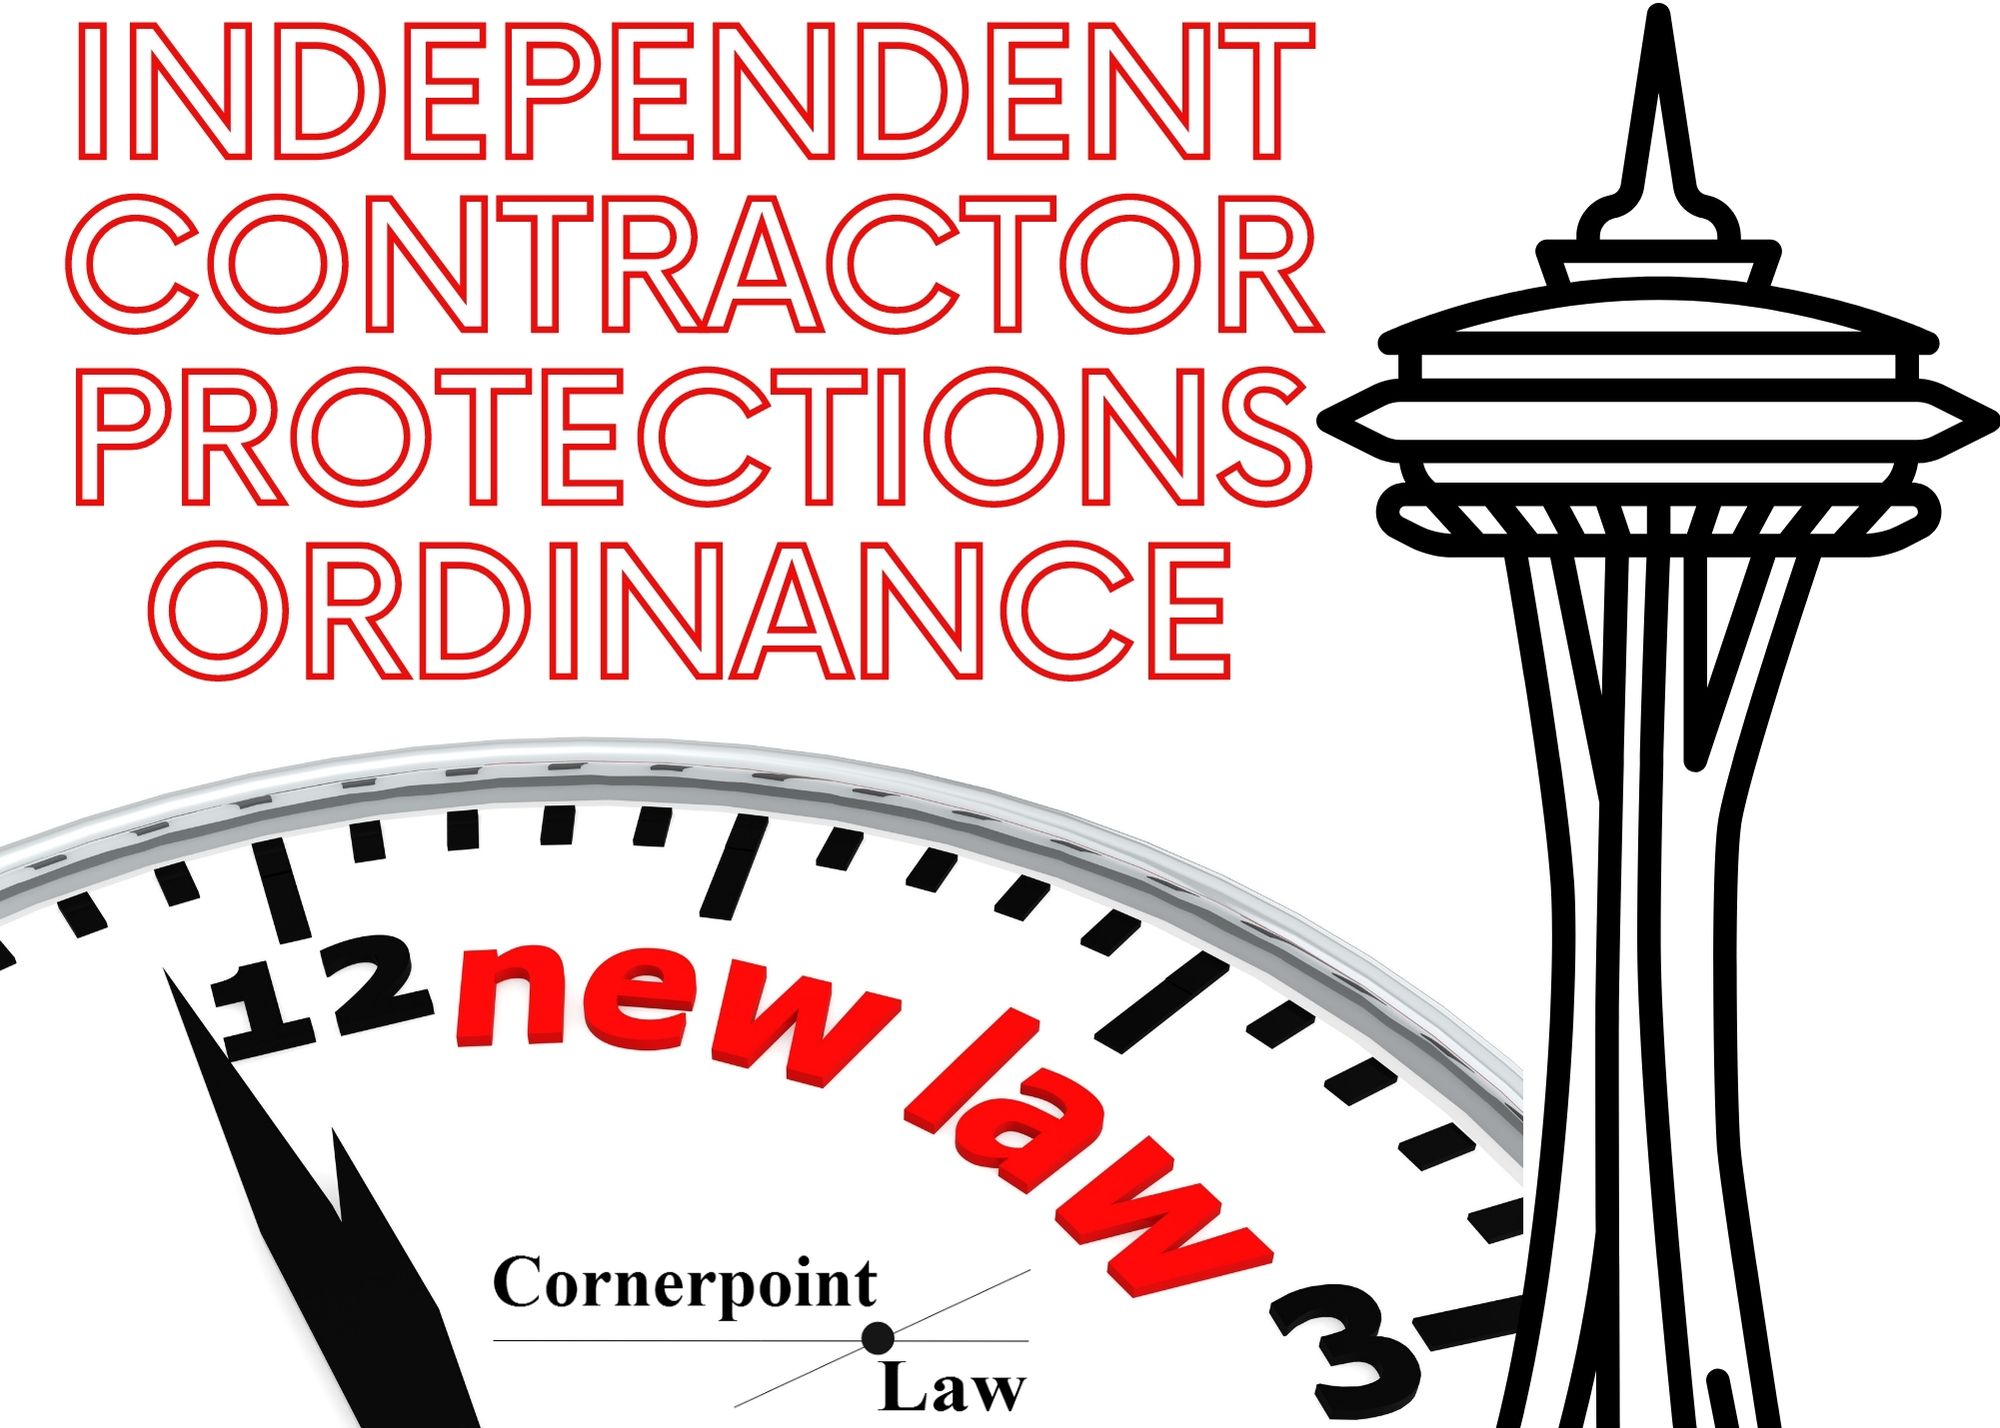 Independent Contractor Protections Ordinance Graphic